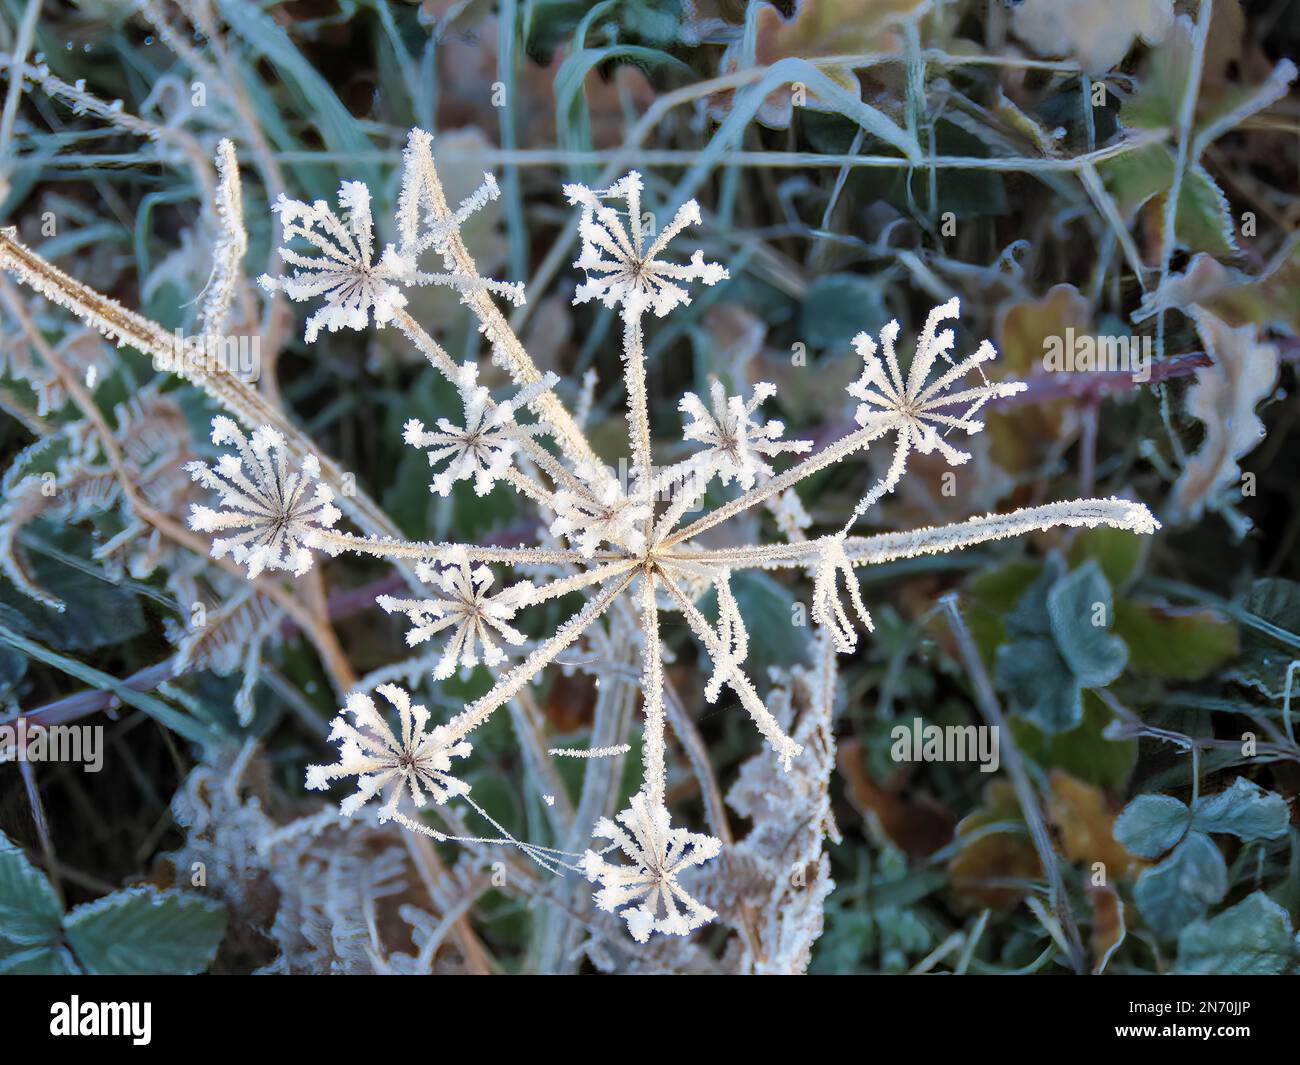 frost on wildflower head in the countryside Stock Photo